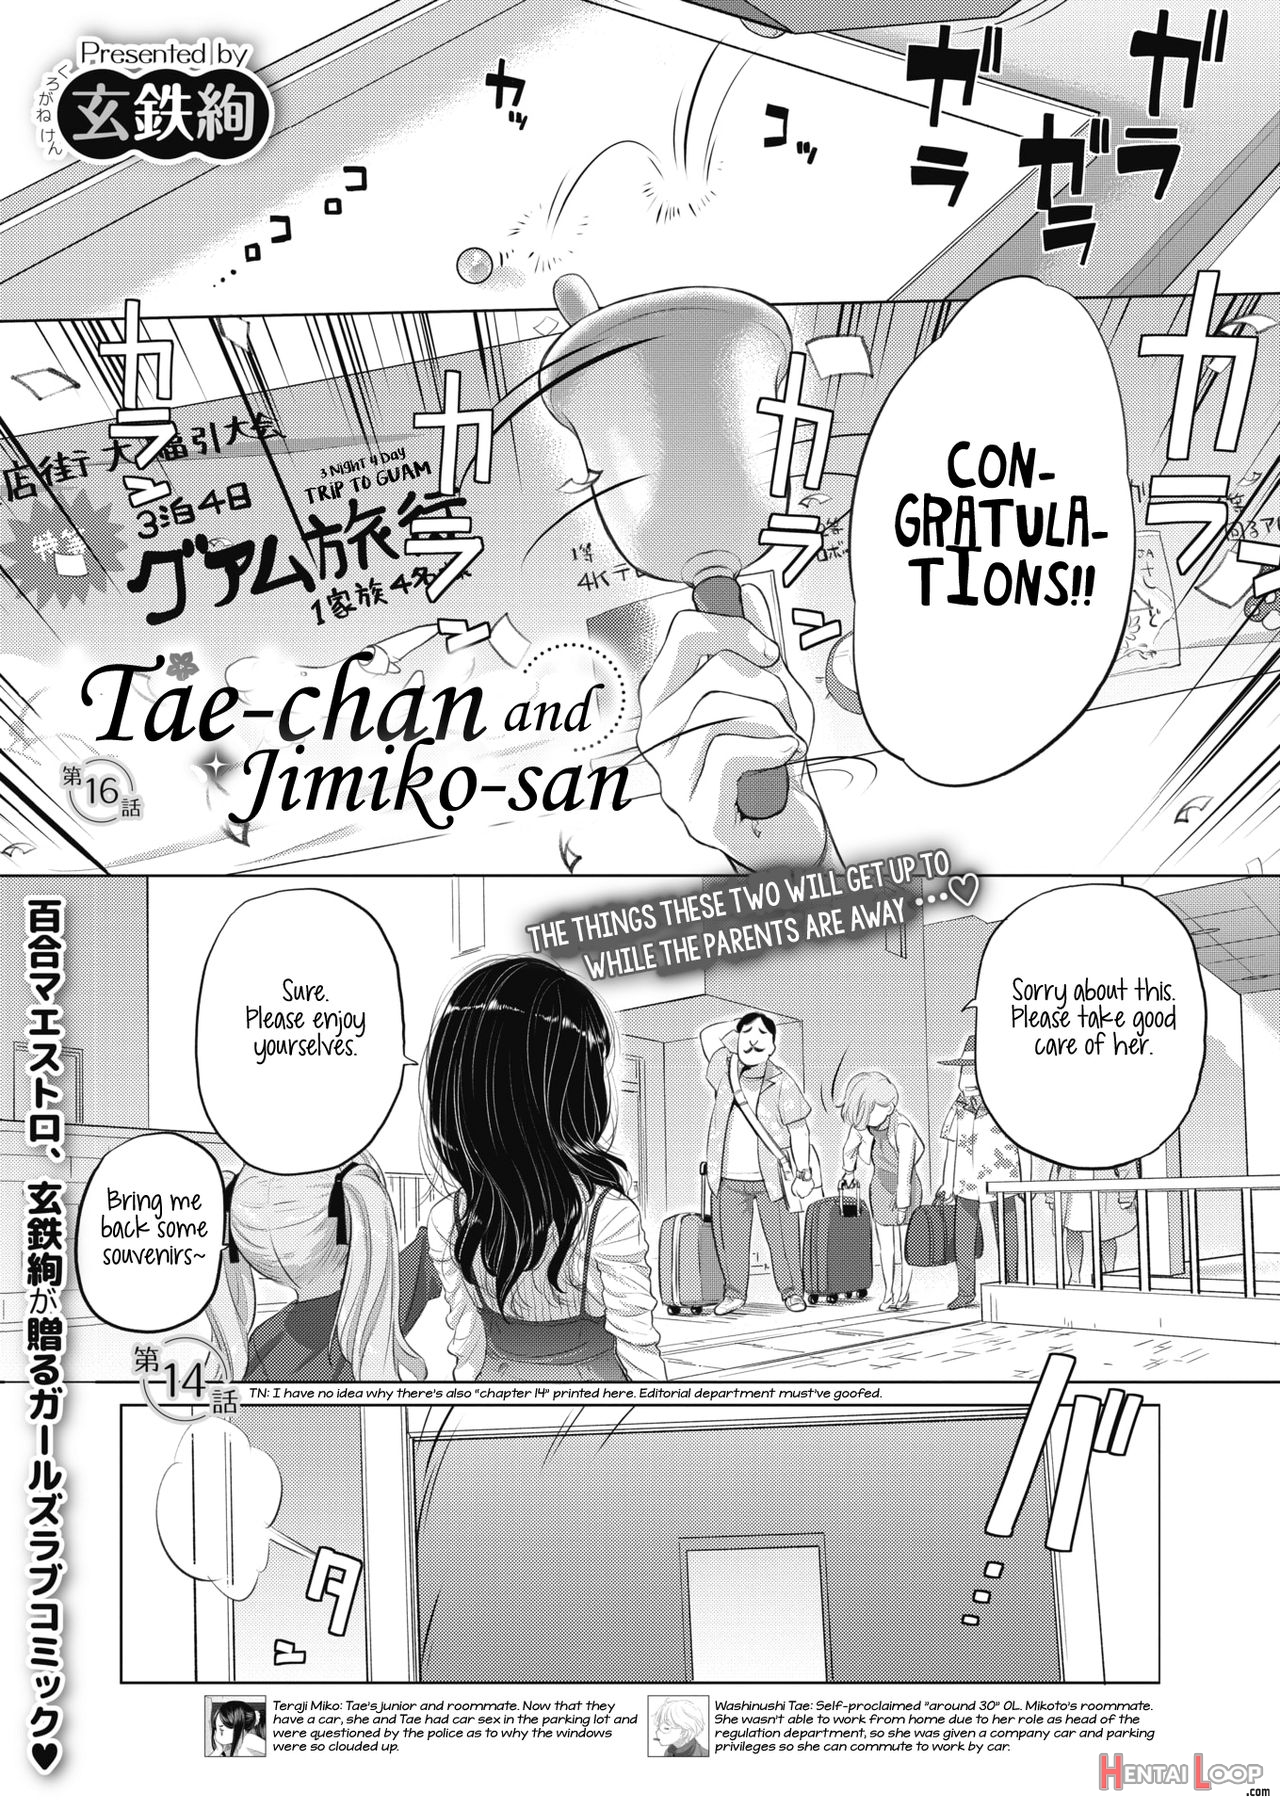 Tae-chan And Jimiko-san Ch. 1-27 page 179